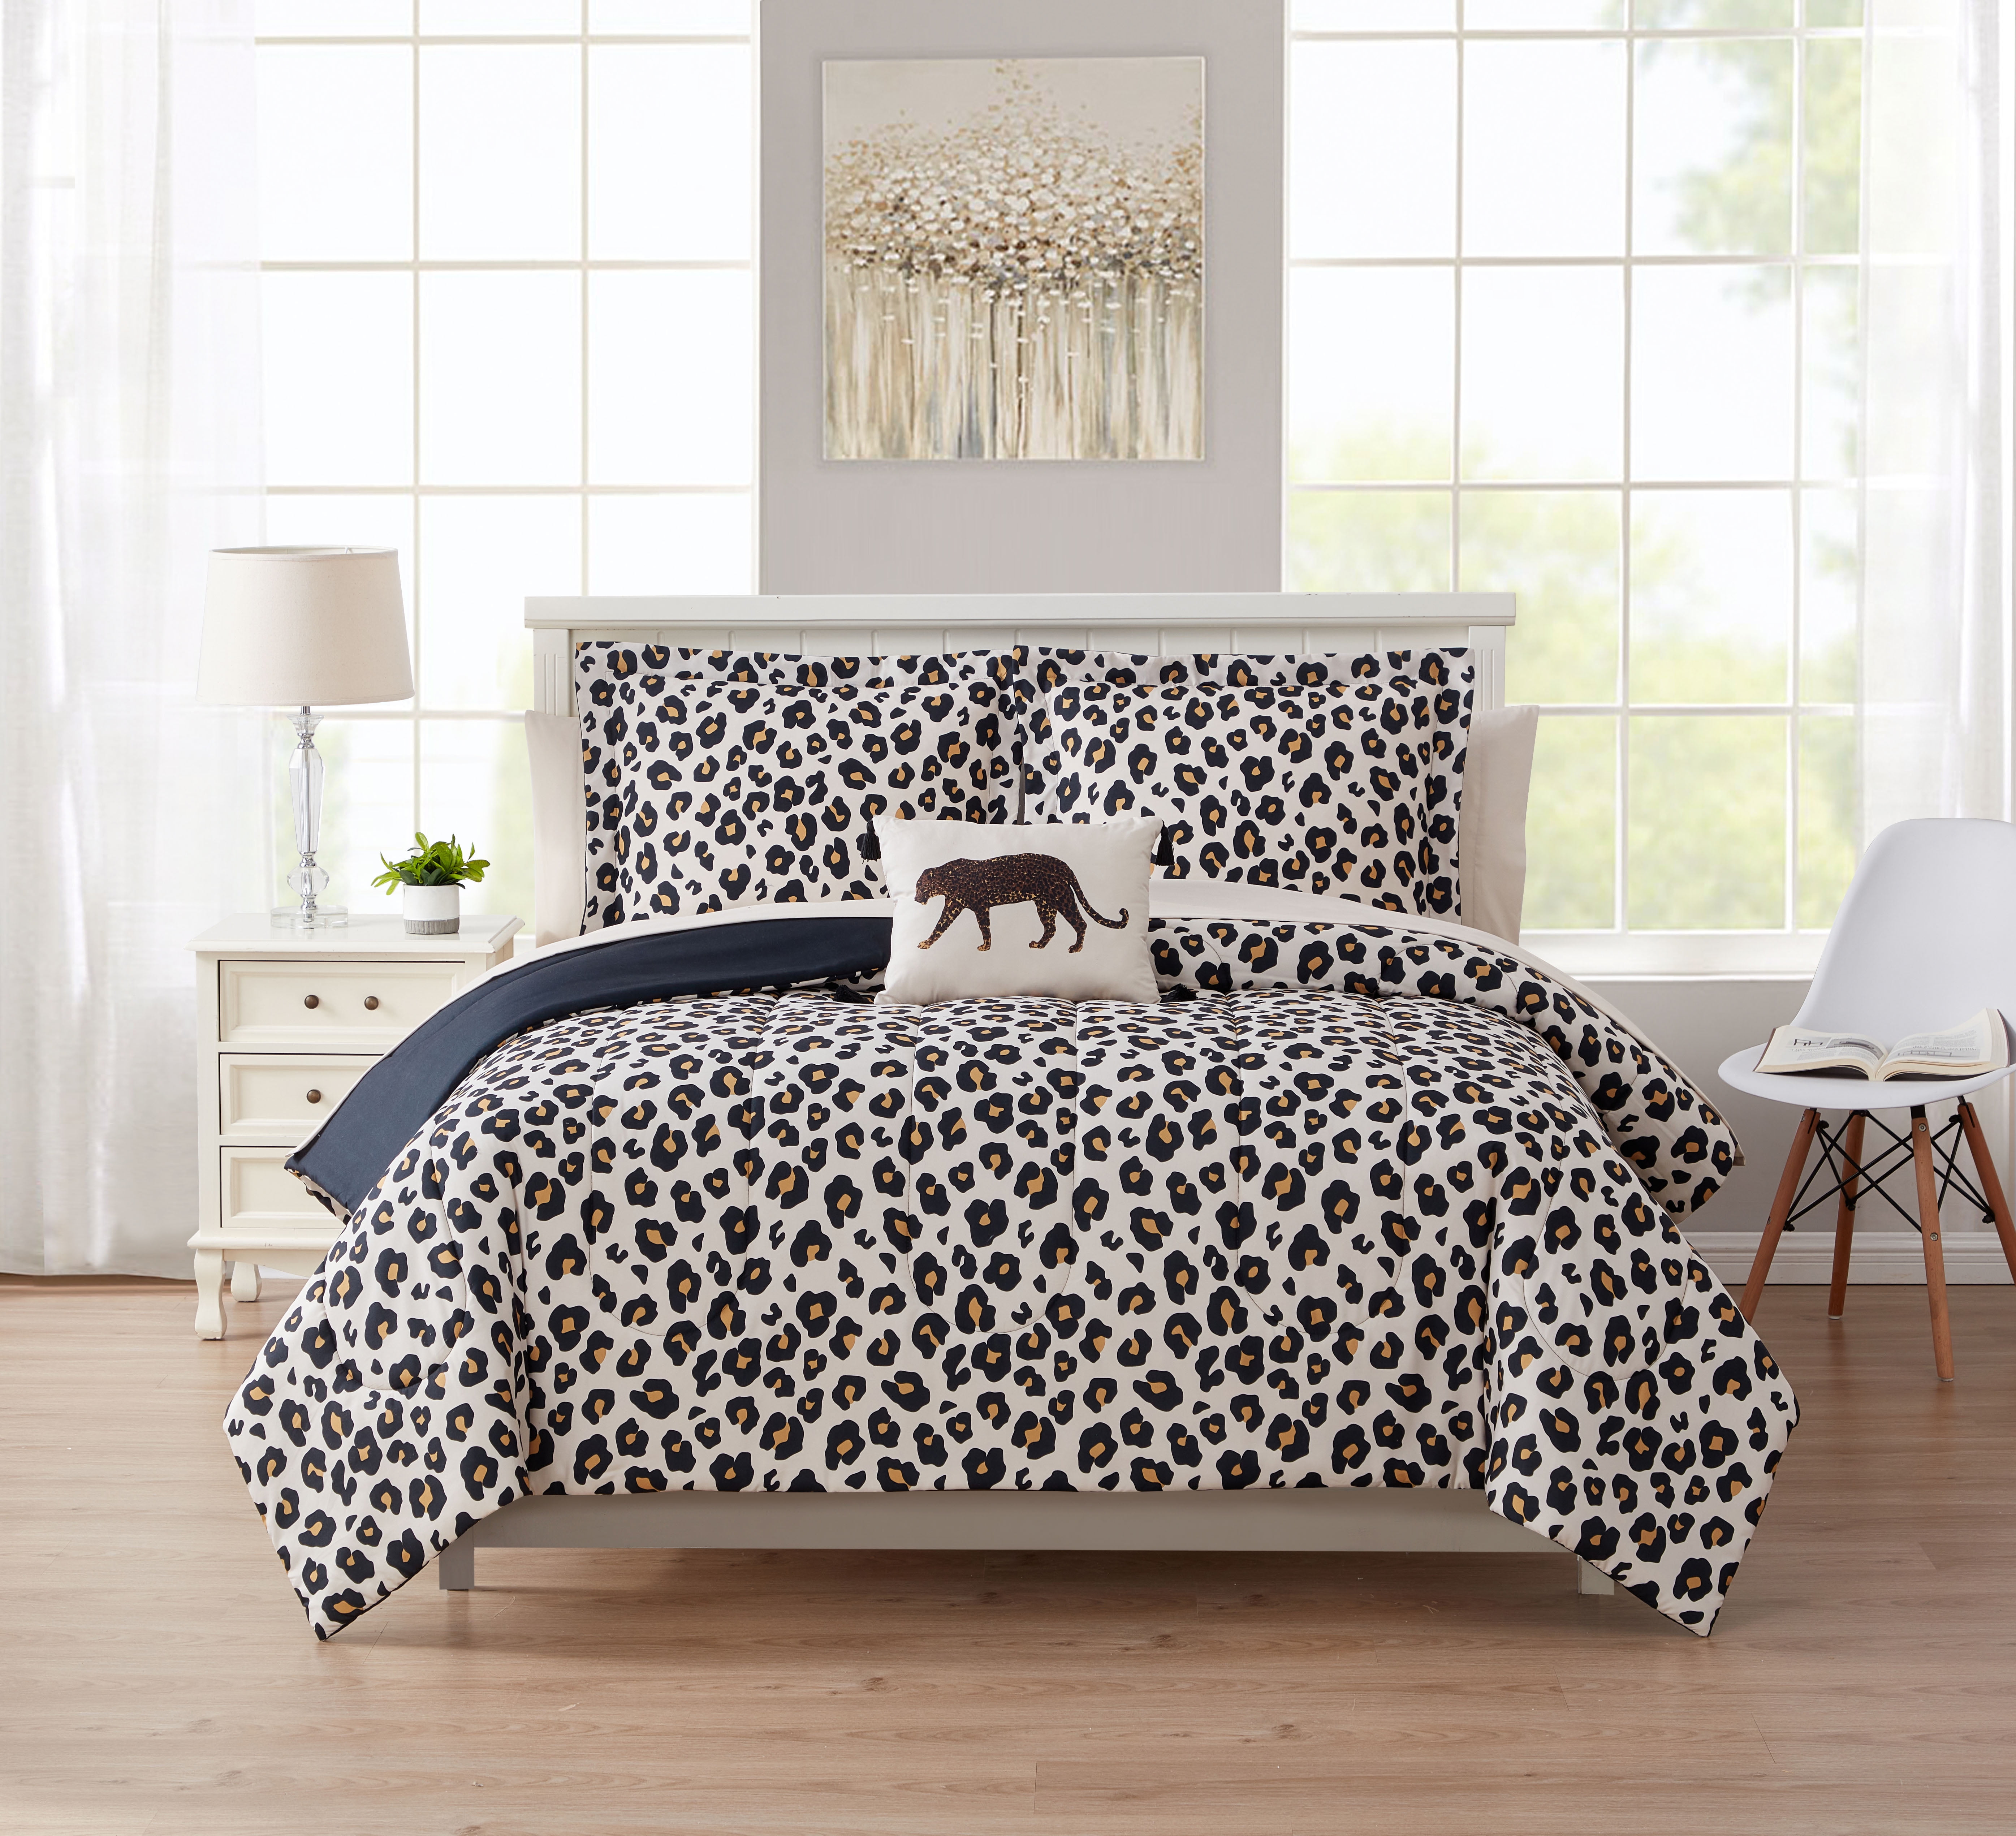 Mainstays 8 Piece Cheetah Print Bed in a Bag Comforter Set with Sheets,  Queen 